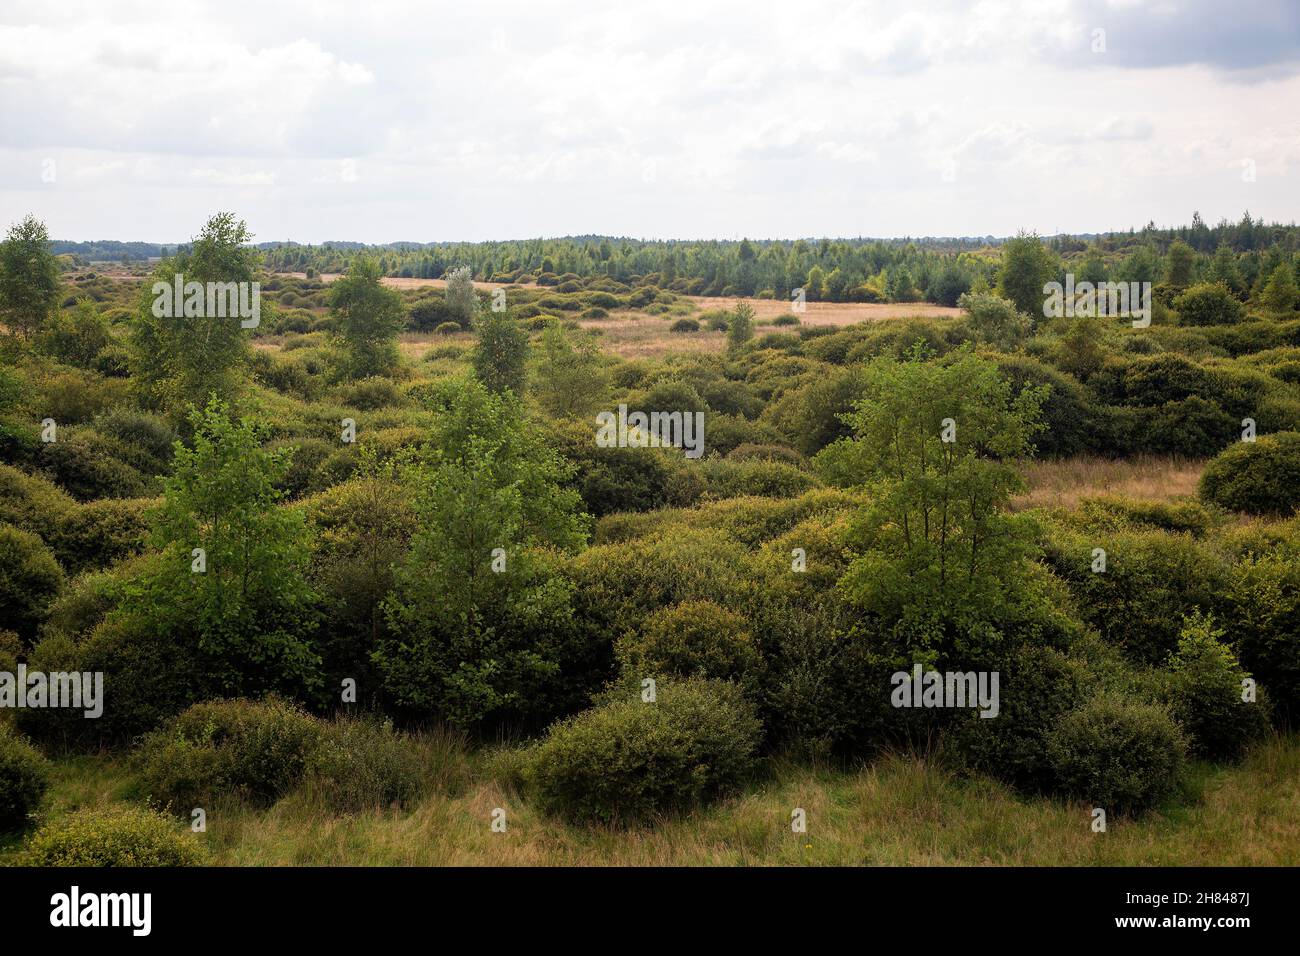 Area with spring of brook Amerdiep, shot from watchtower; Drenthe, Netherlands Stock Photo